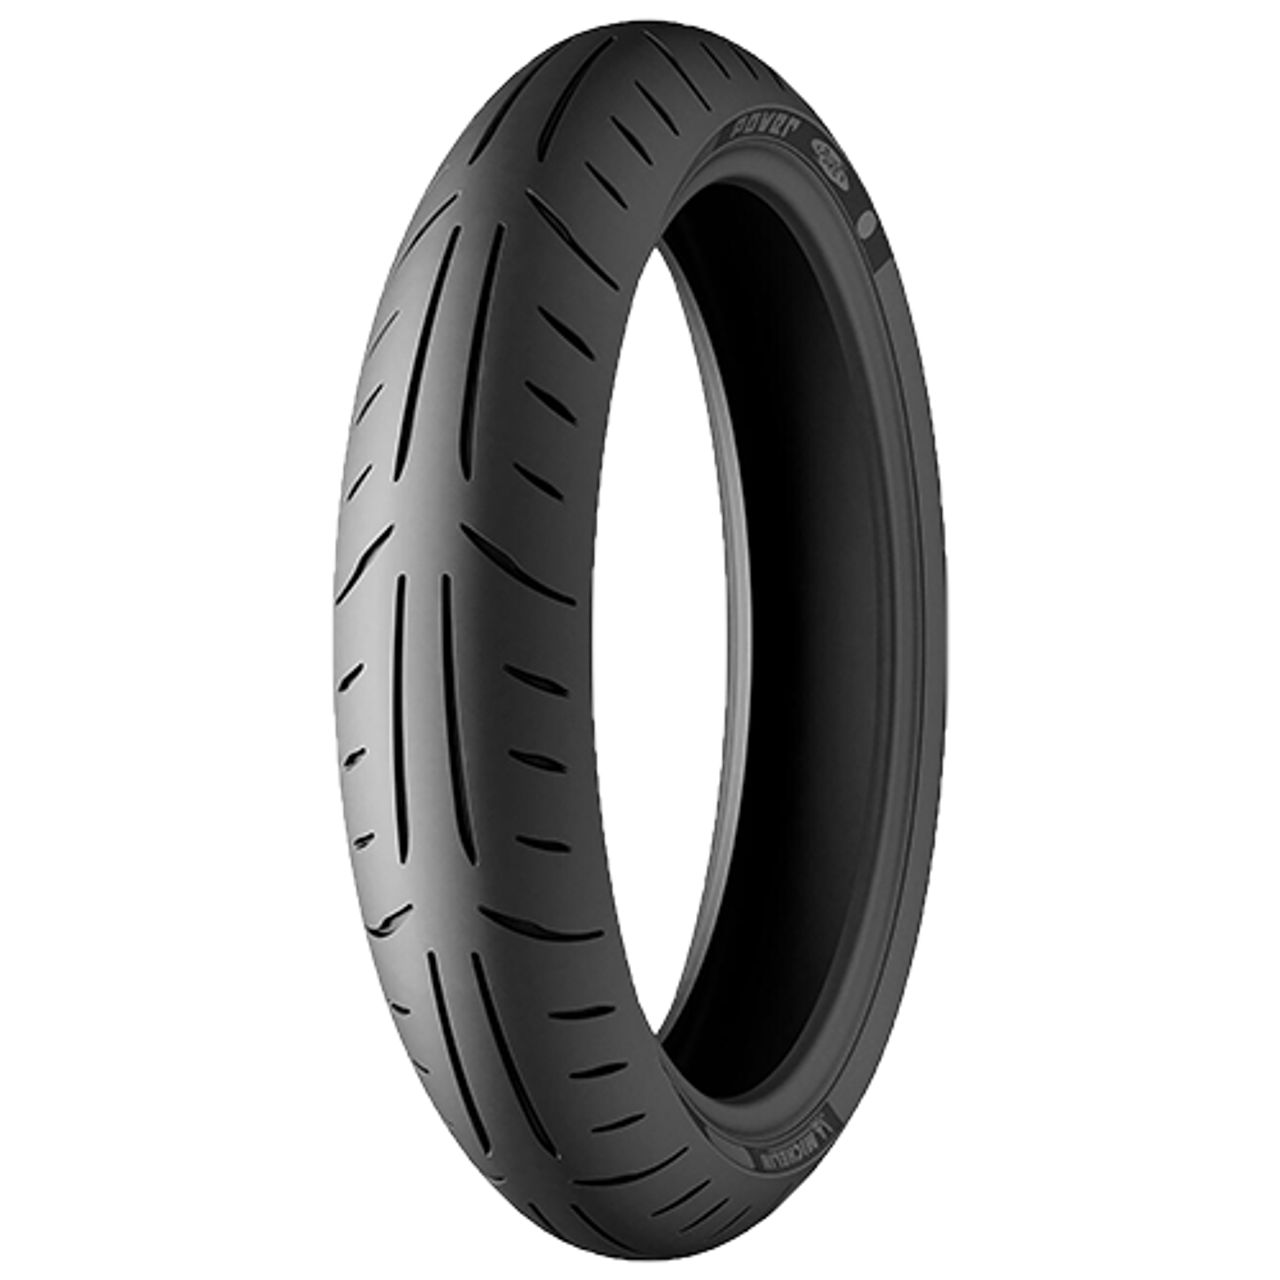 MICHELIN POWER PURE SC FRONT 120/70 - 15 M/C TL 56S FRONT